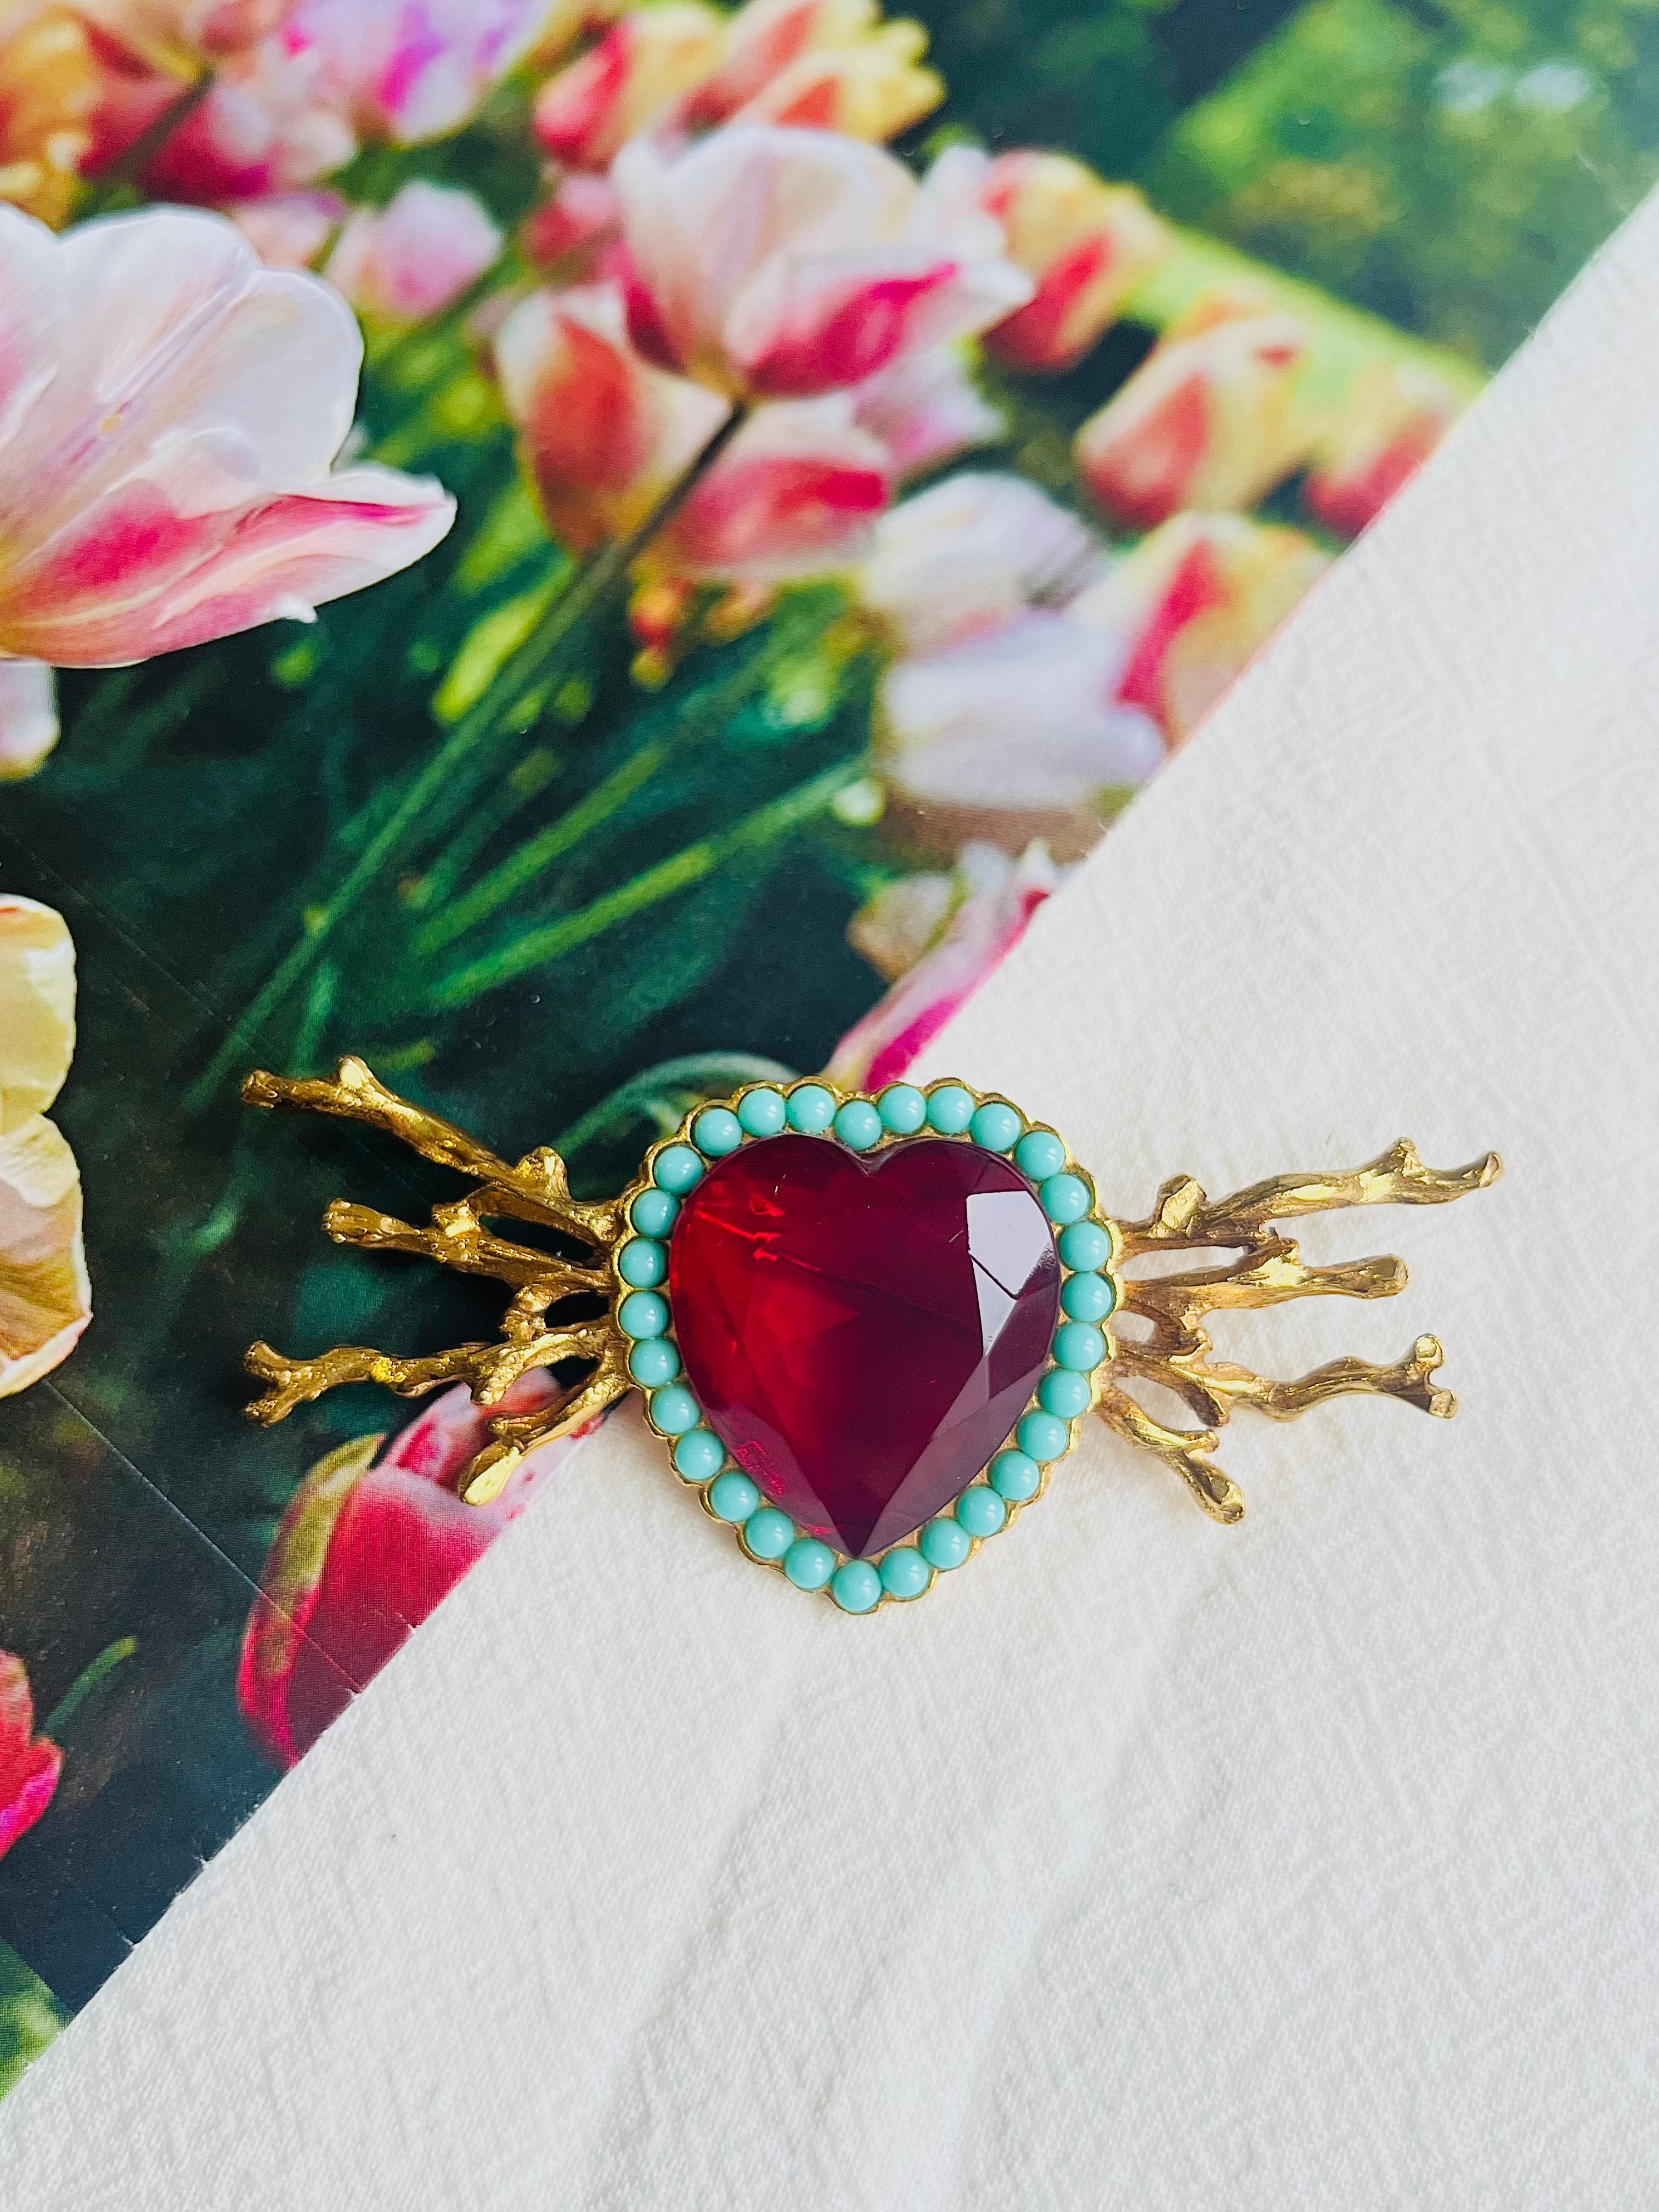 Christian Lacroix Red Ruby Crystal Heart Love Turquoise Beaded Pearls Coral Wings Brooch, Gold Tone

Very excellent condition. A very beautiful brooch, signed at the back. 100% Genuine. 

Size: 8.3*3.5 cm.

Weight: 26 g.

_ _ _

Great for everyday